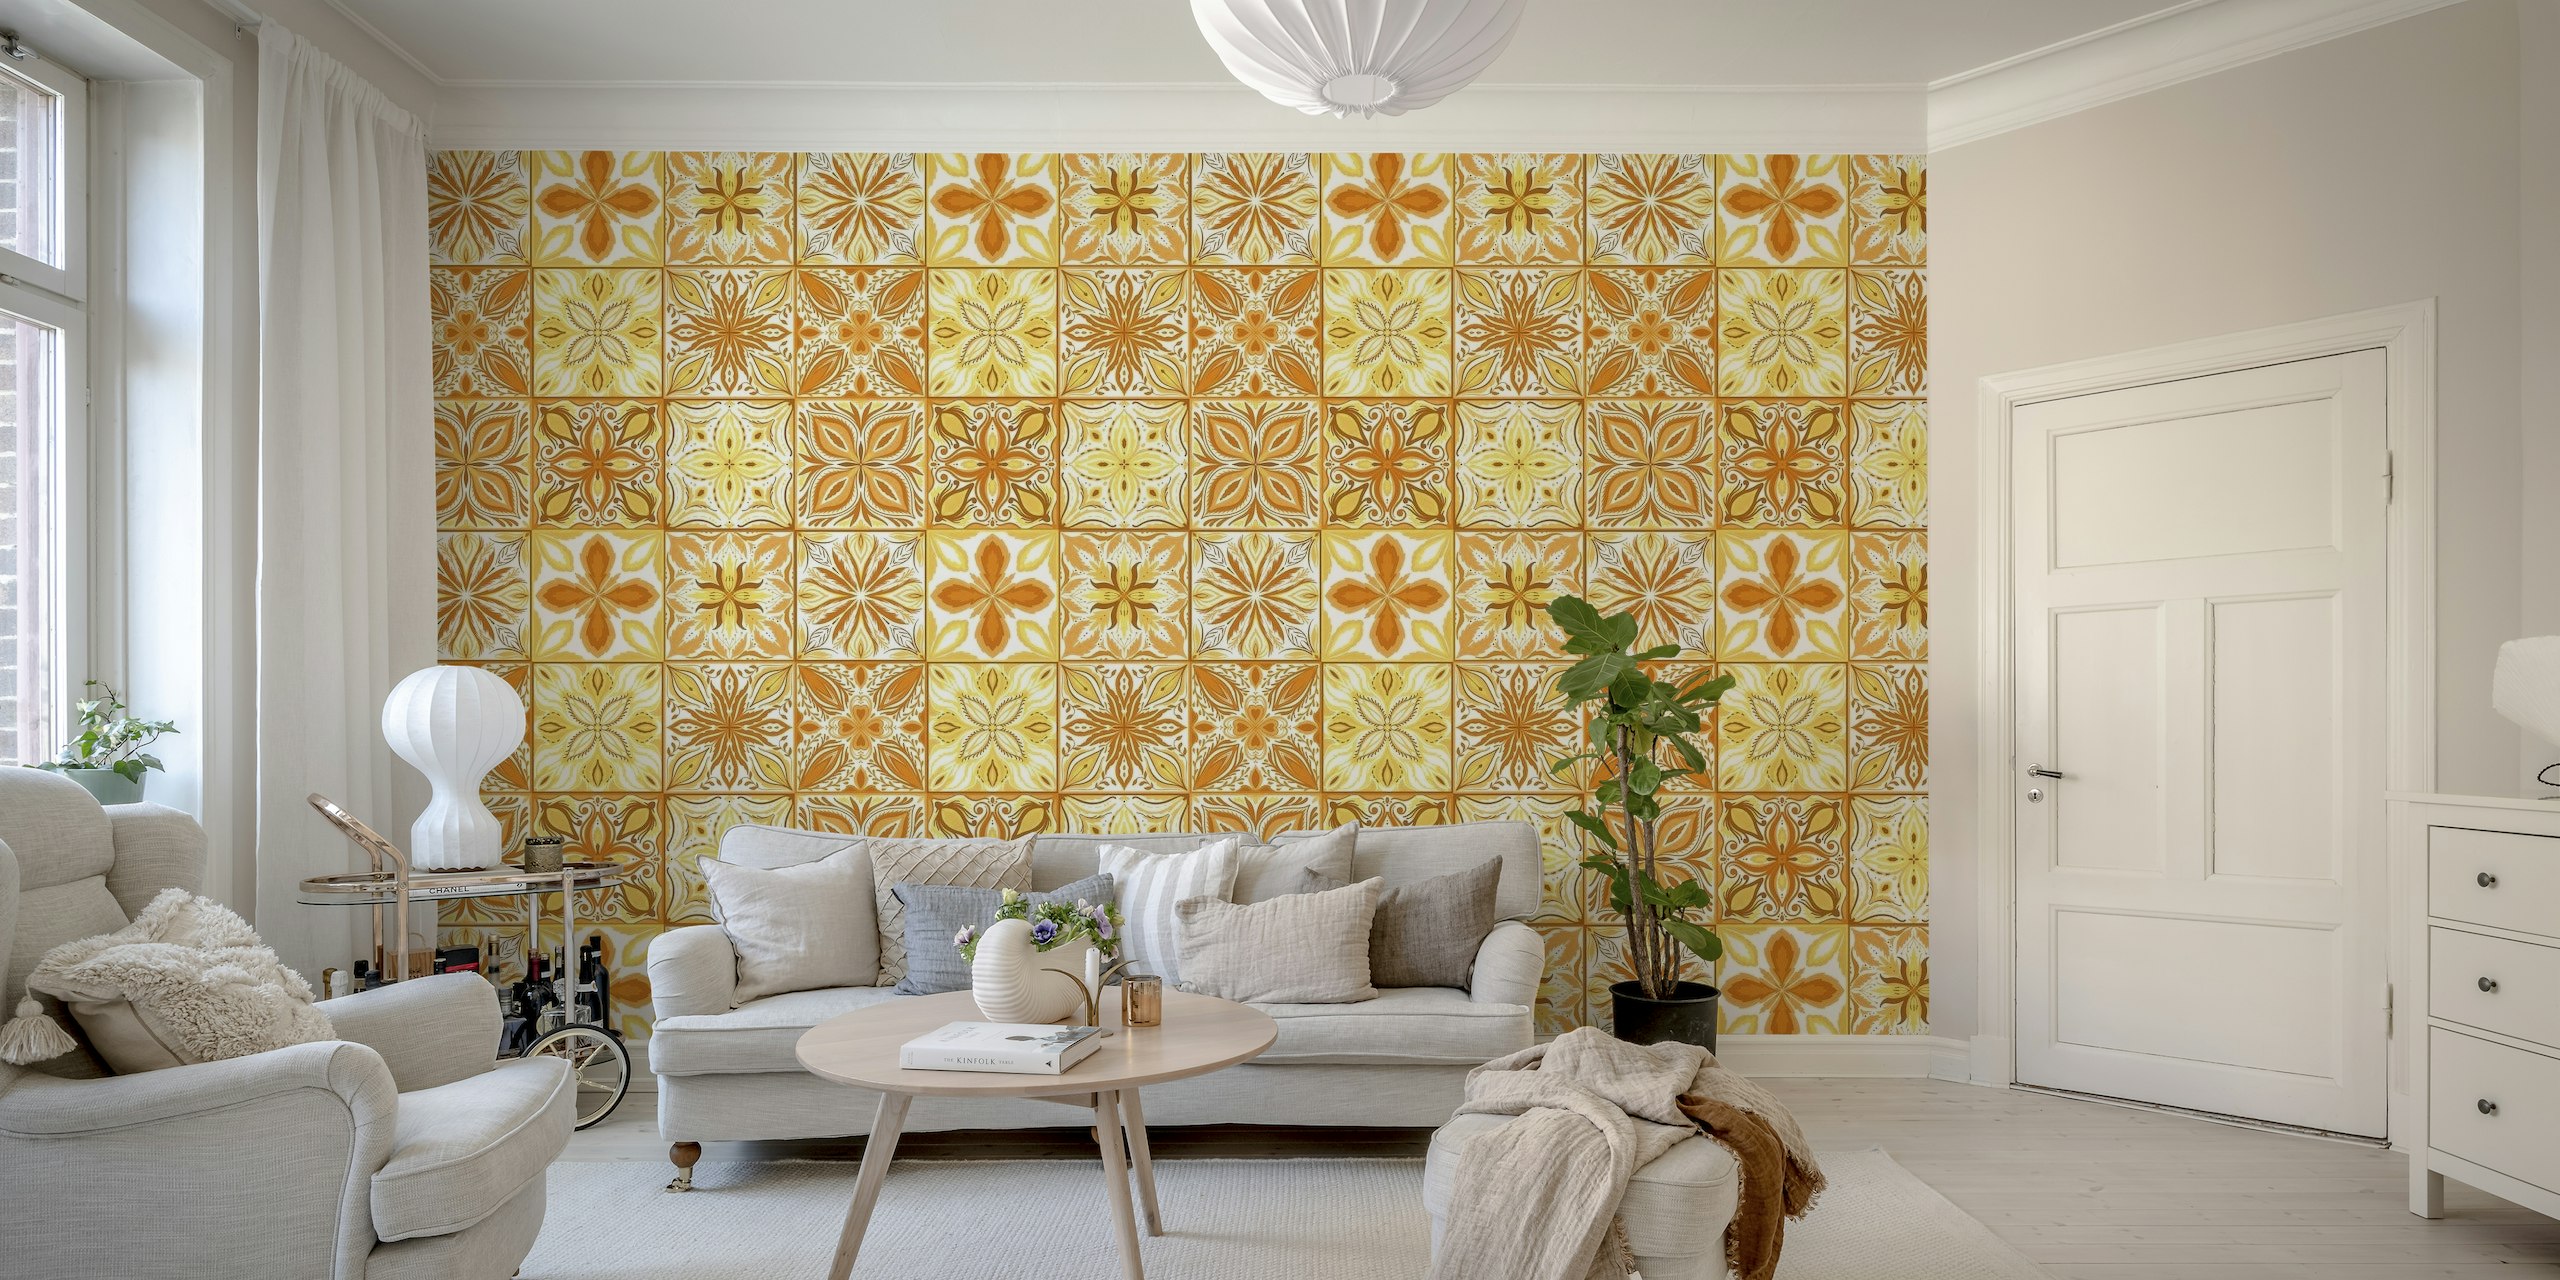 Ornate tiles in orange and yellow behang